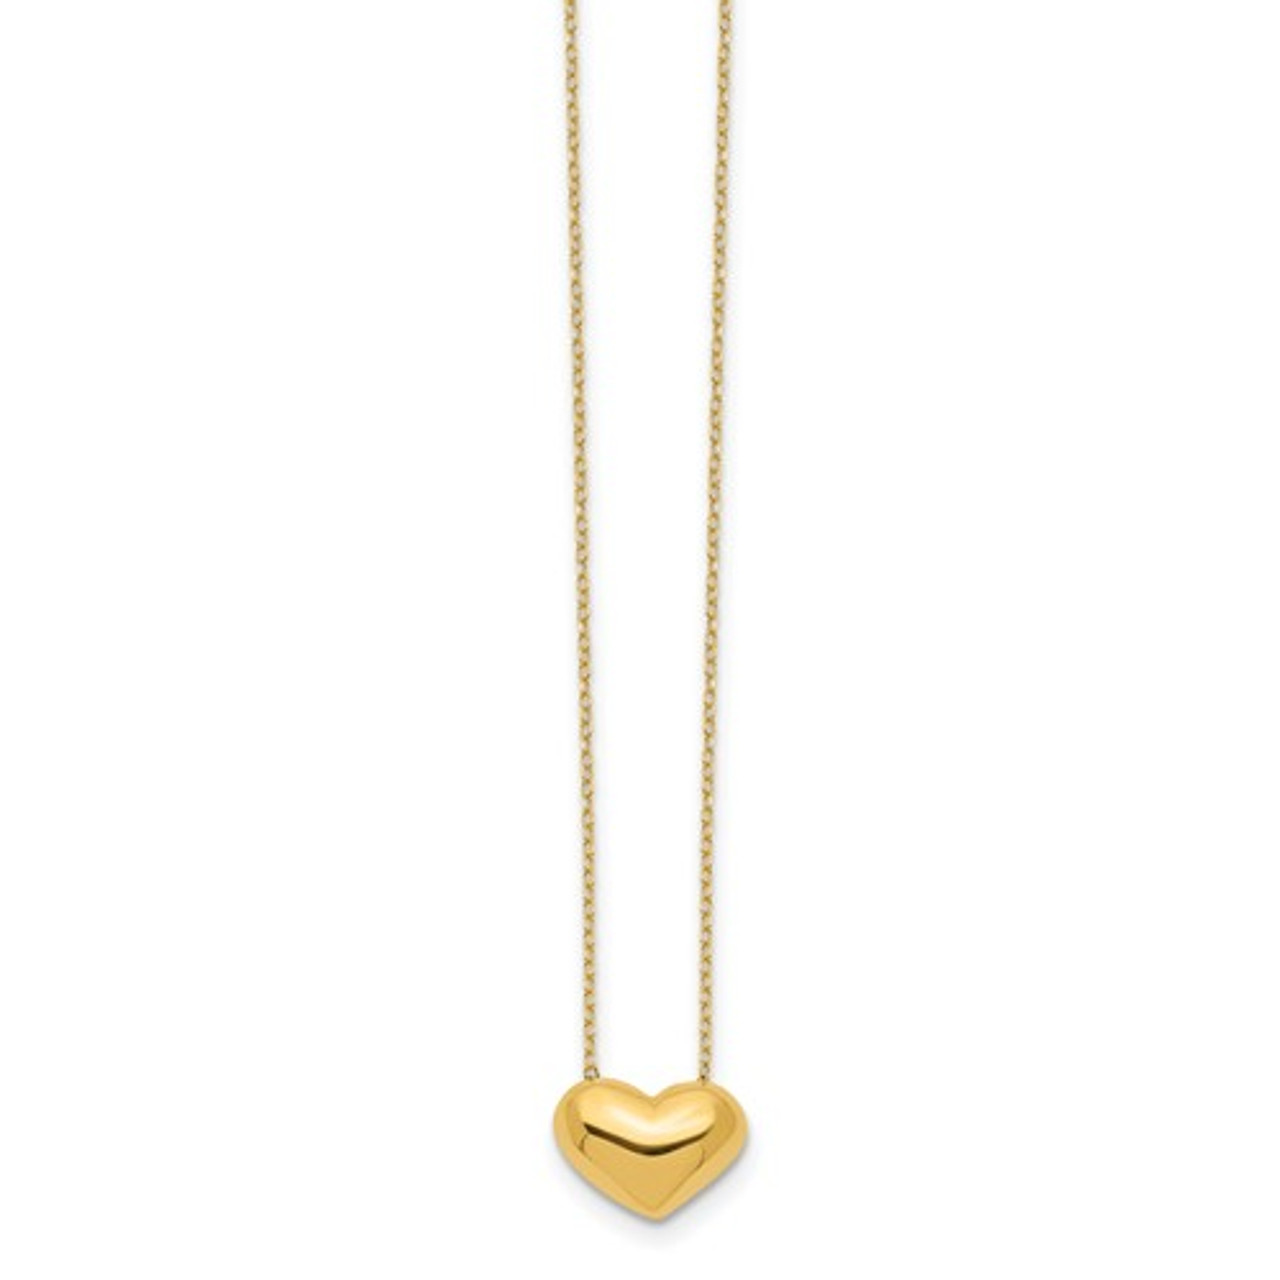 14K Solid Yellow Gold Puffed Heart Necklace